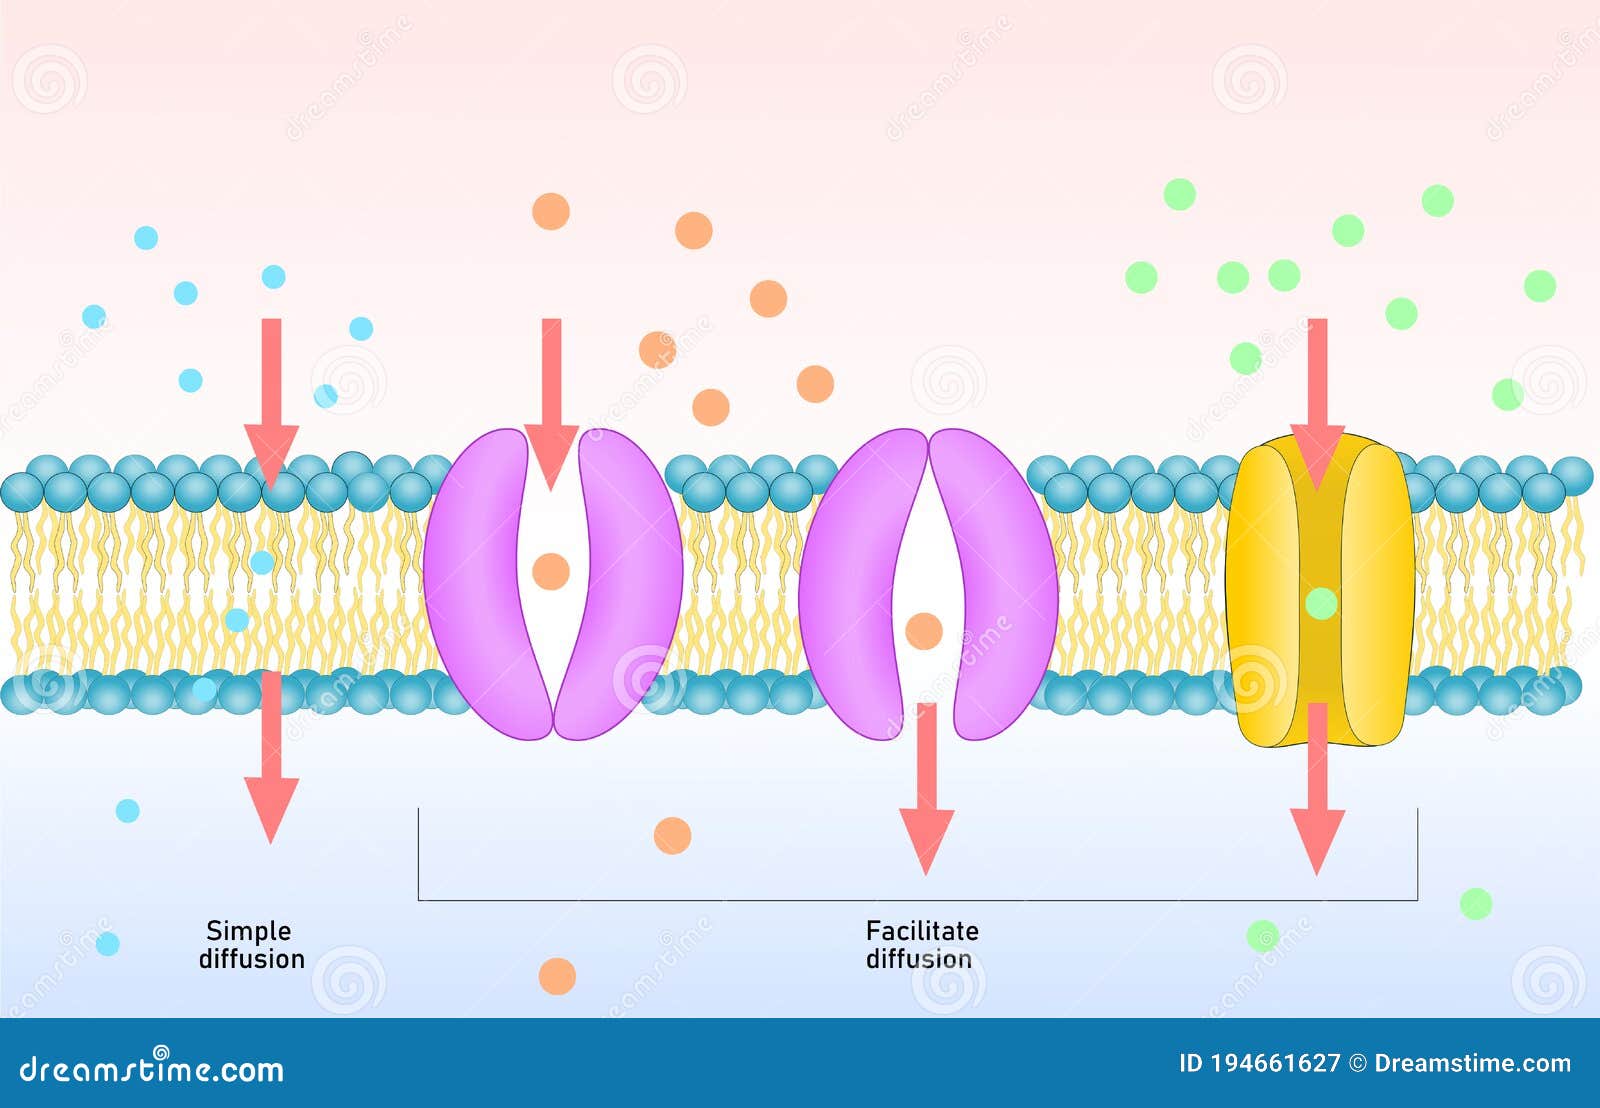 Simple And Facilitated Diffusion. Stock Vector Illustration of